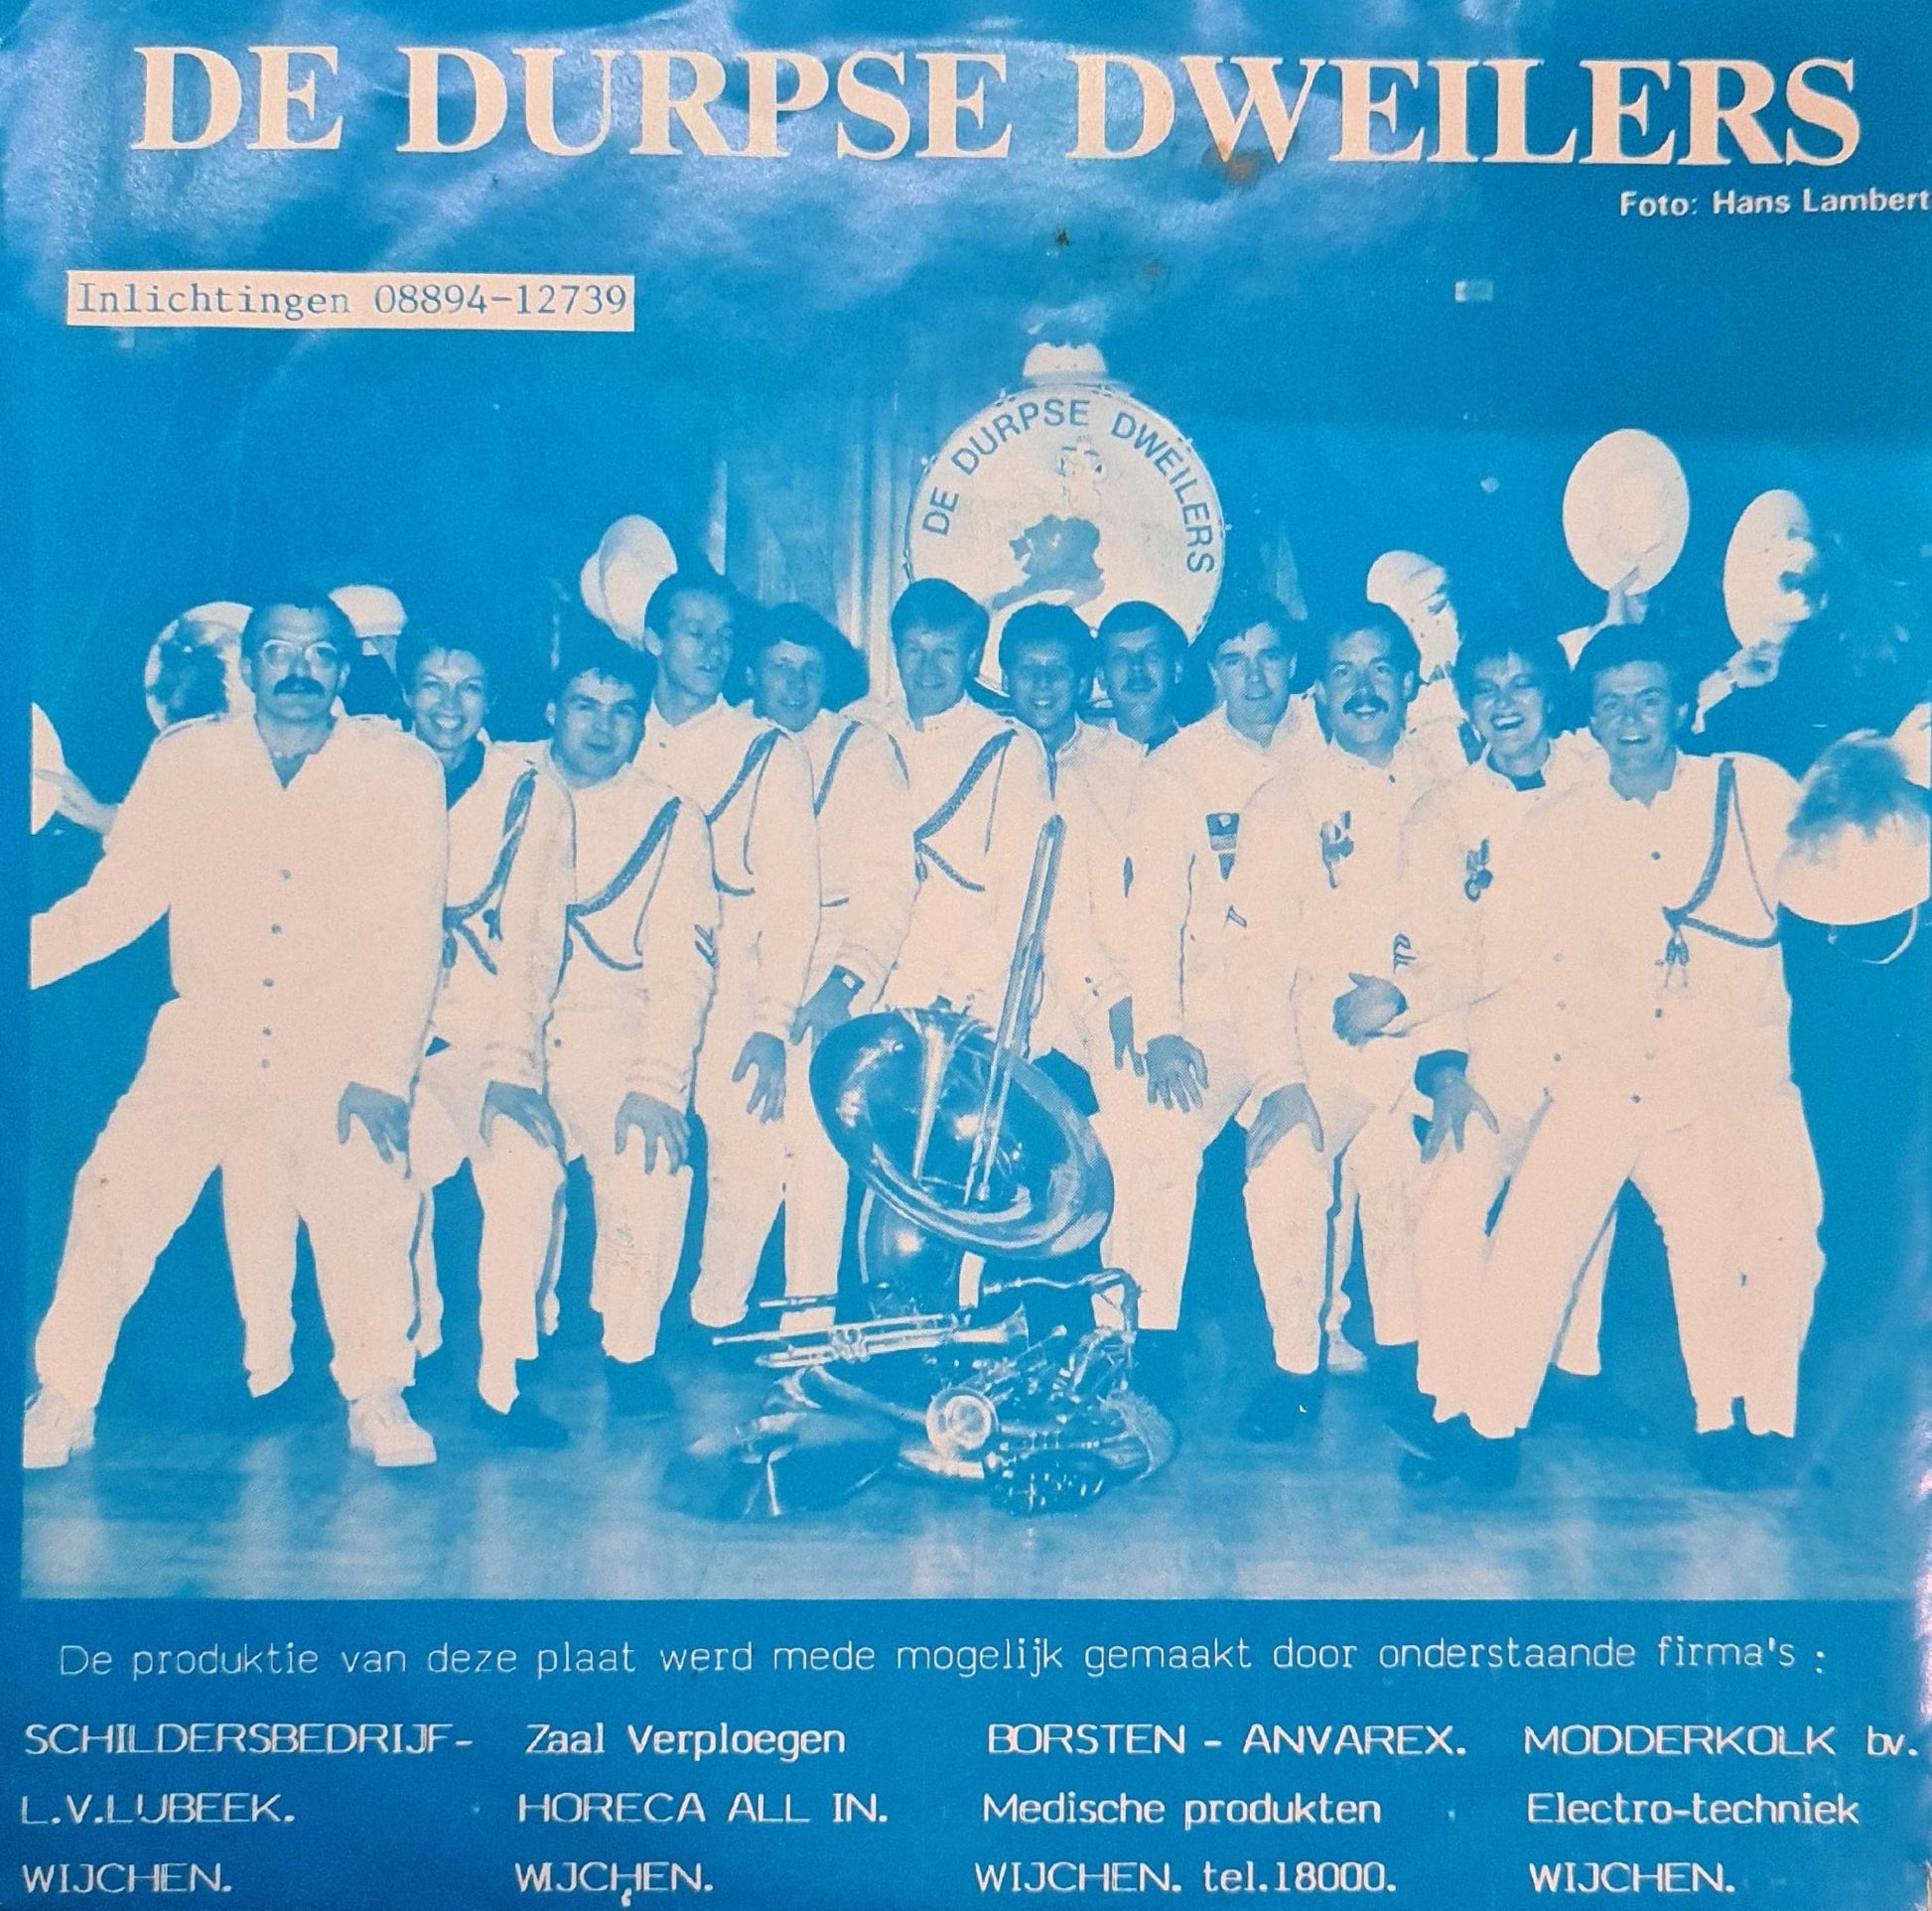 Durpse Dweilers - Officer of the day 28076 Vinyl Singles Goede Staat